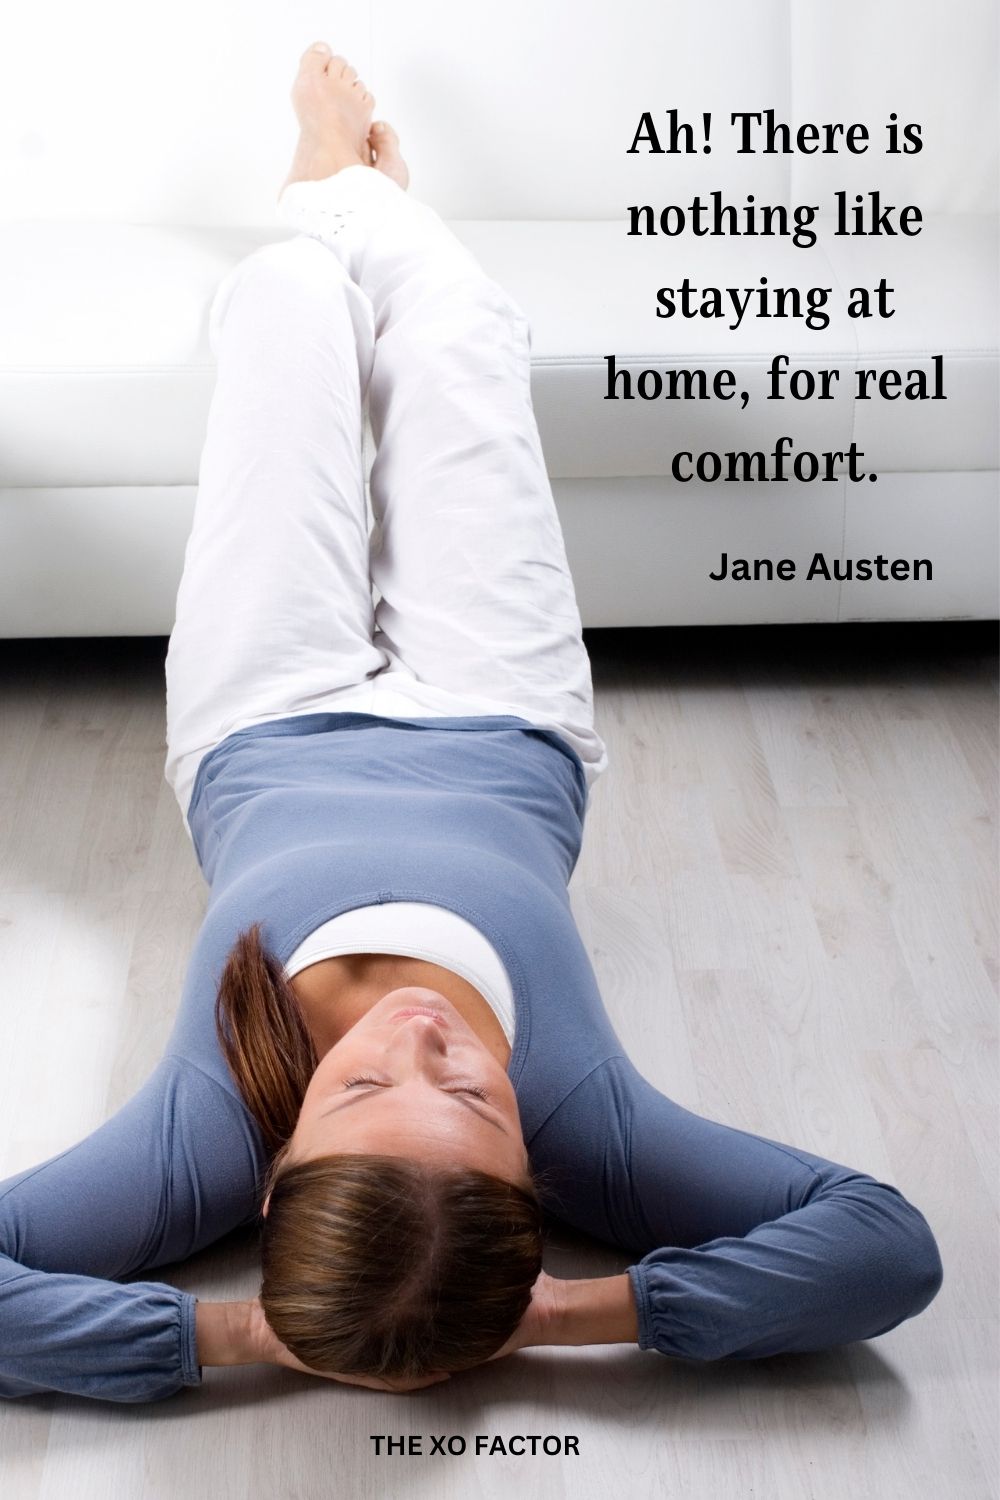 Ah!  There is nothing like staying at home, for real comfort.
Jane Austen